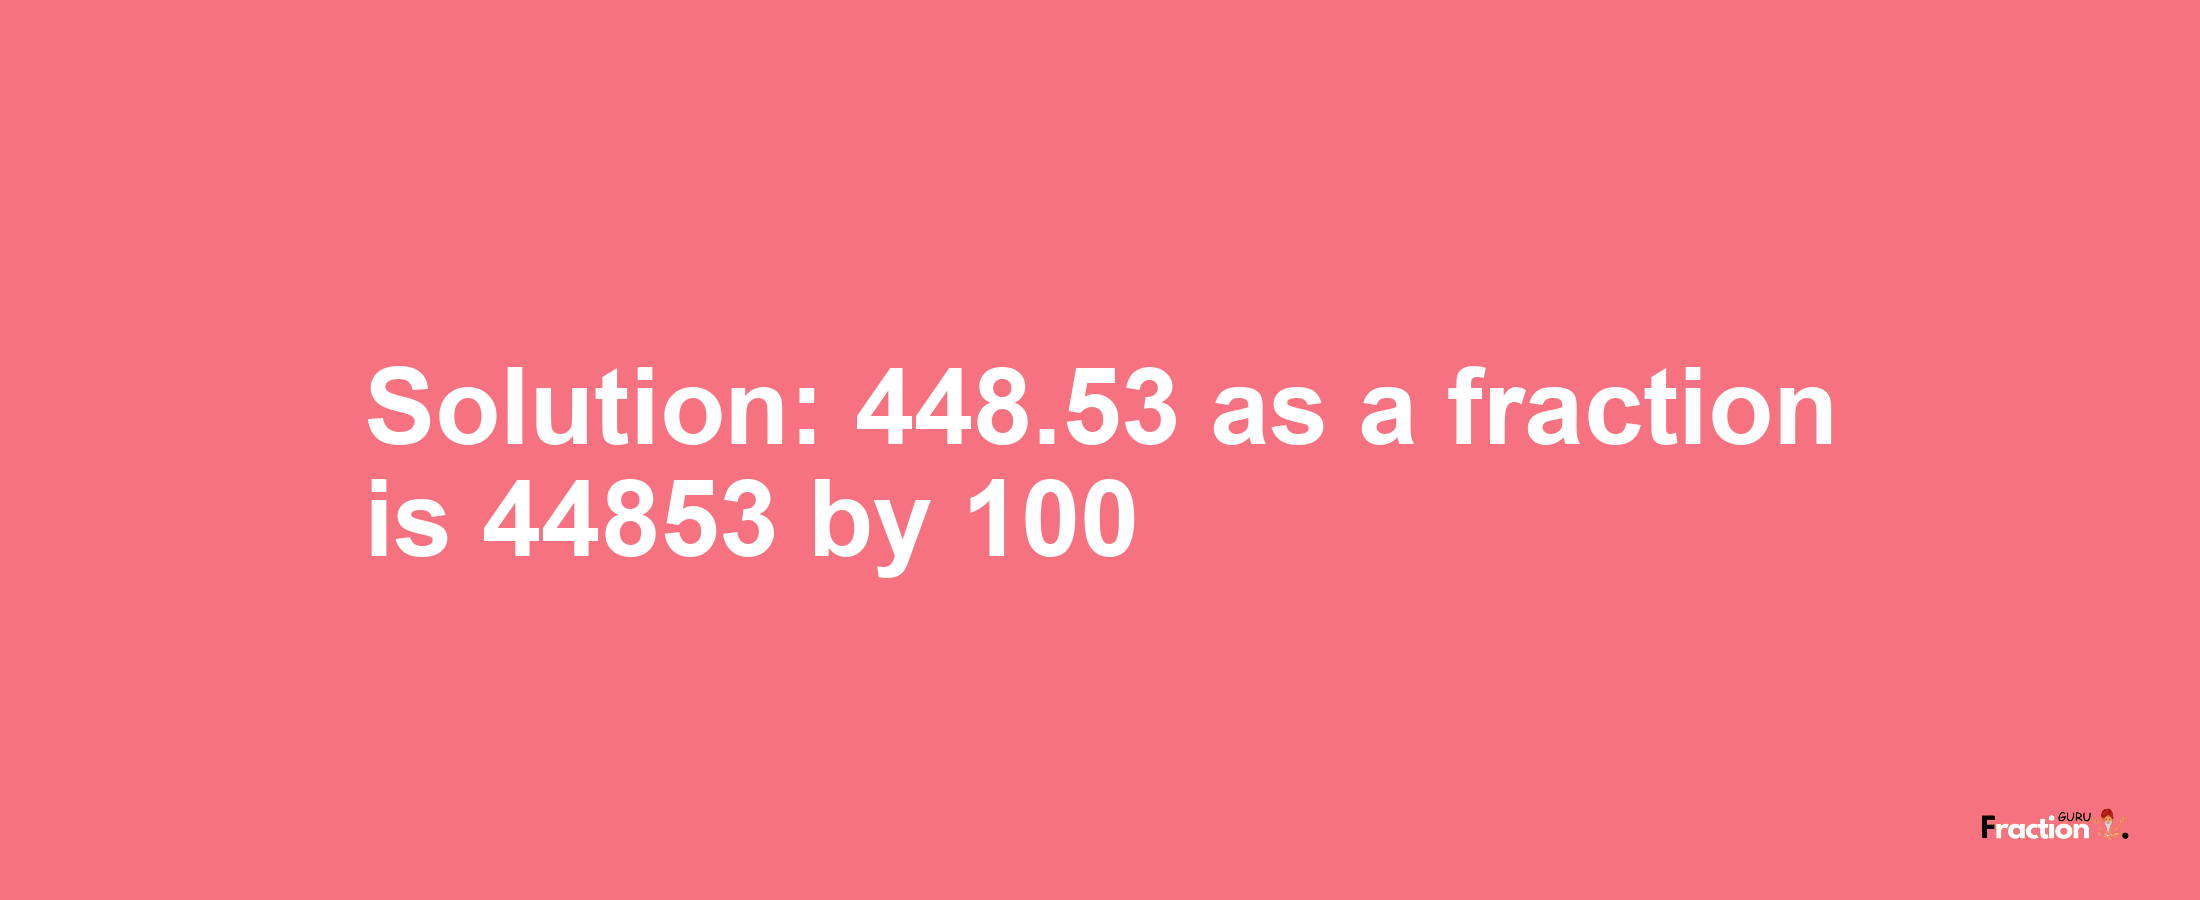 Solution:448.53 as a fraction is 44853/100